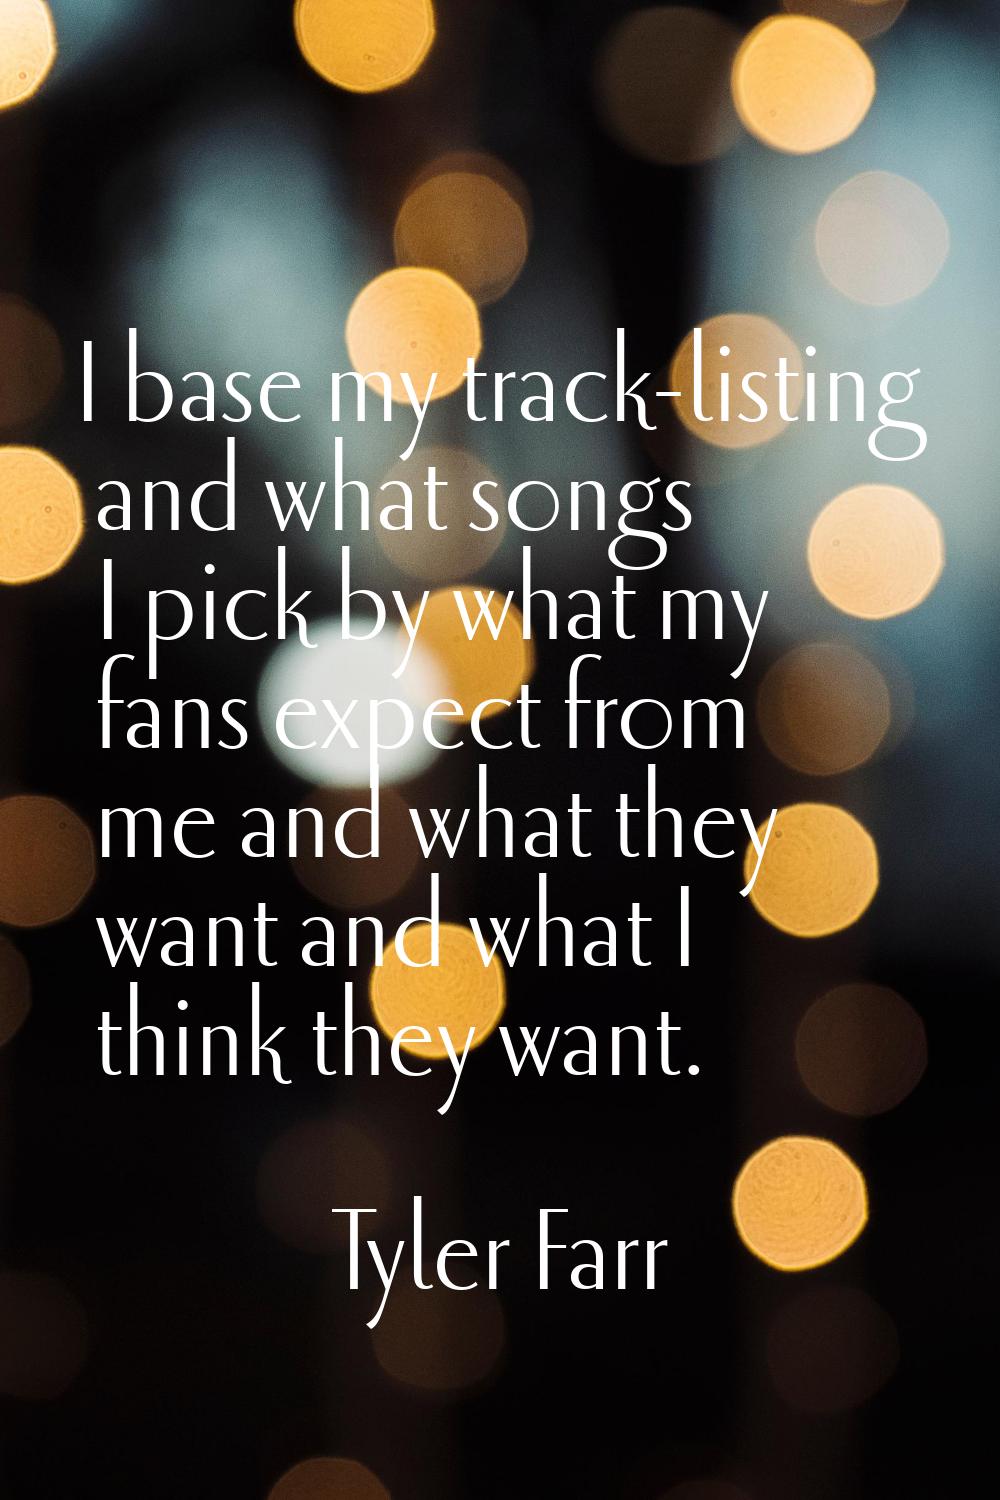 I base my track-listing and what songs I pick by what my fans expect from me and what they want and